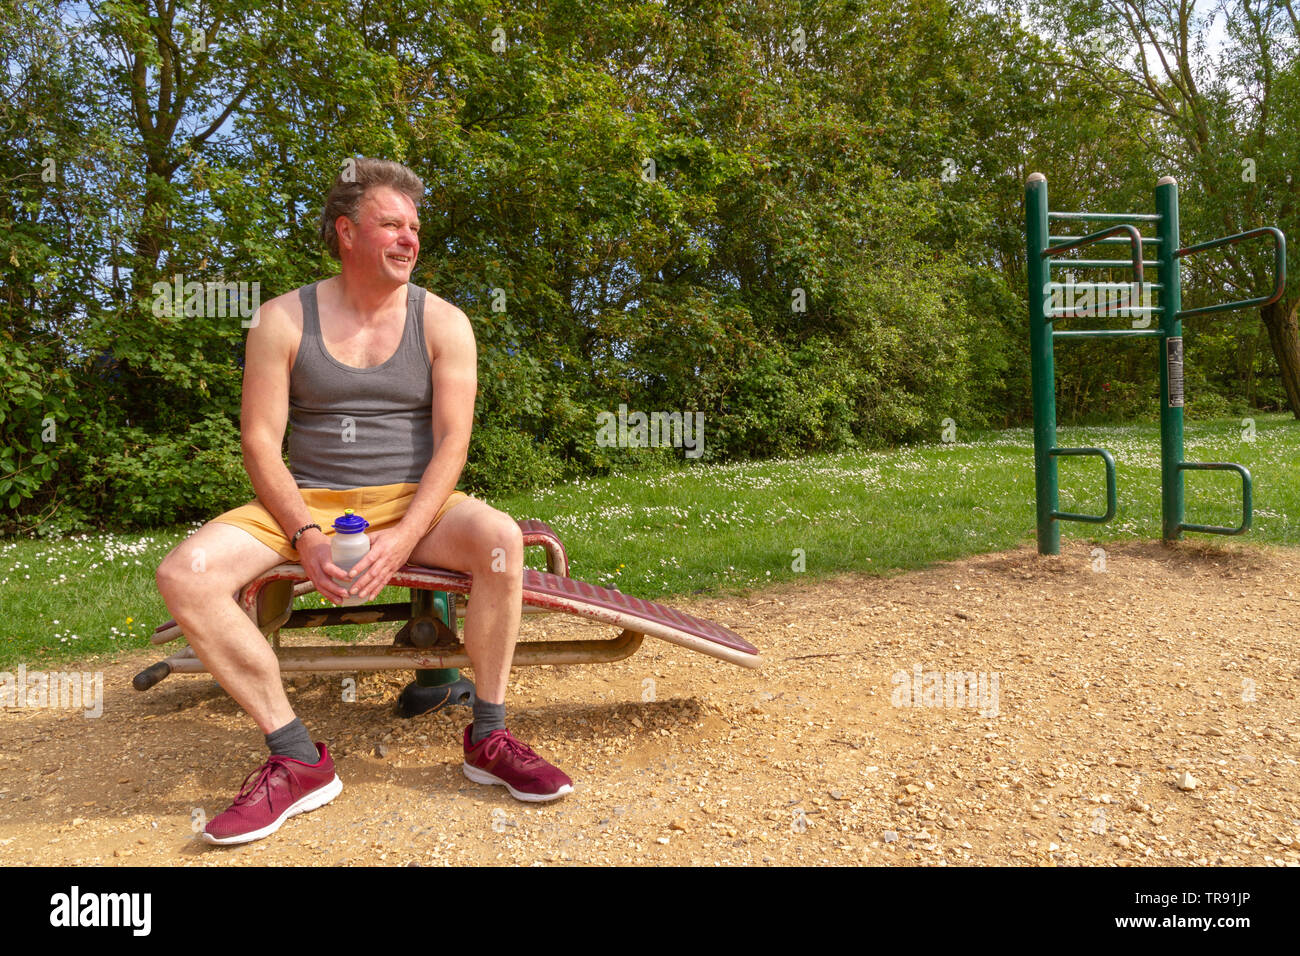 Older (fifty plus) man resting whilst working out on outdoor gym equipment. Healthy outdoors lifestyle concept. Stock Photo